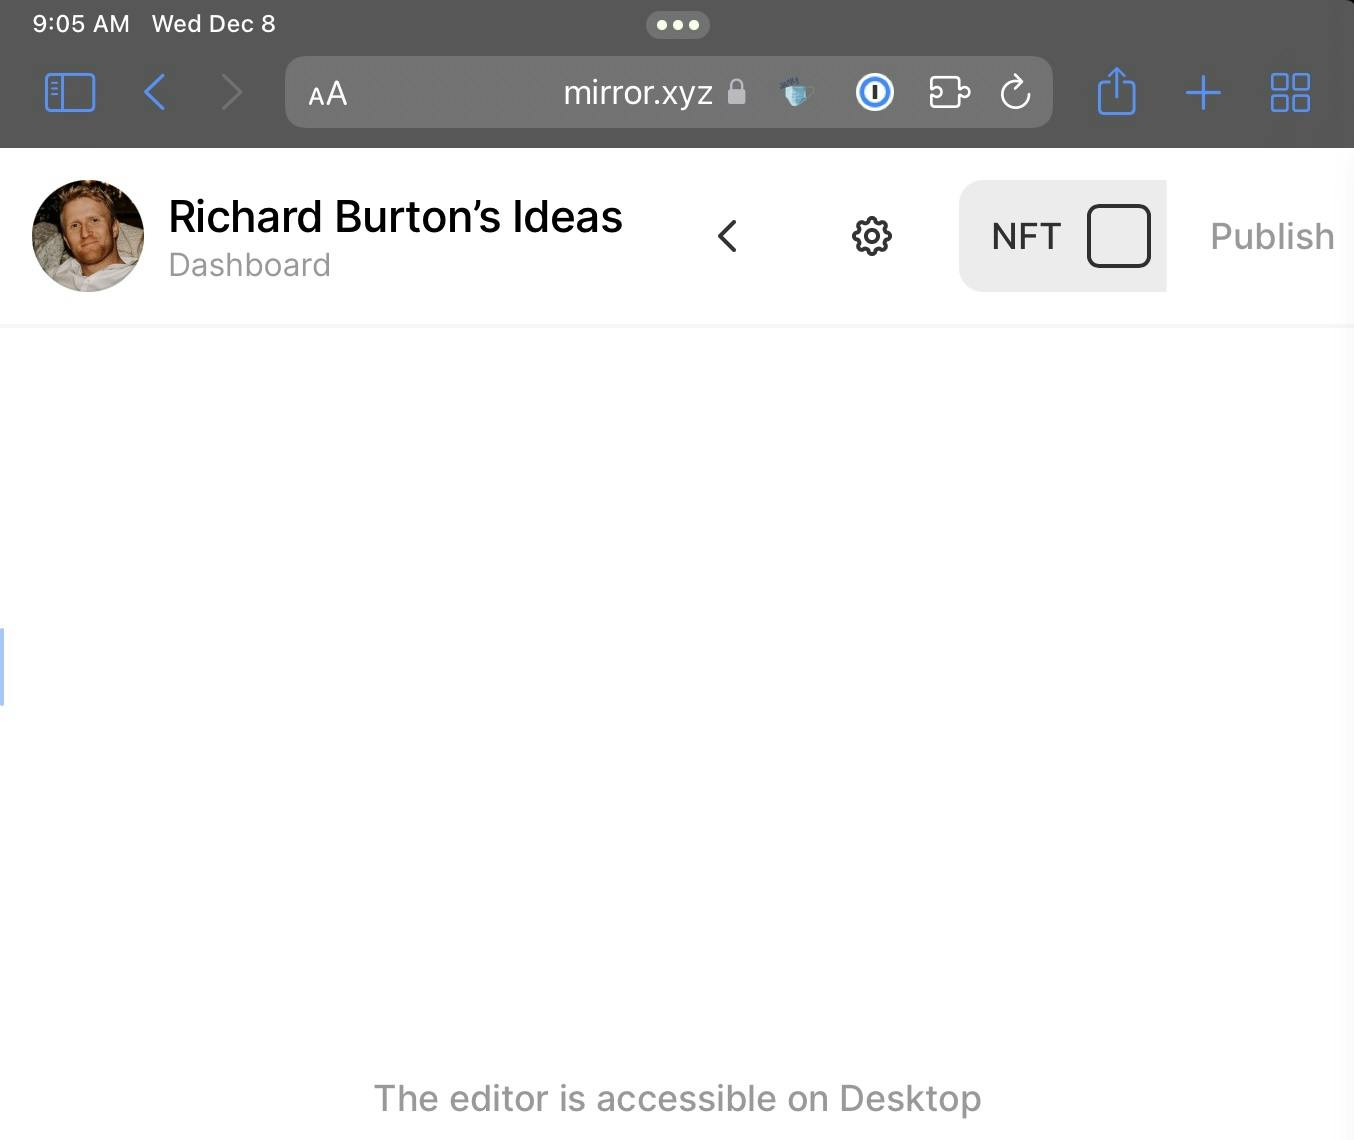 Mirror does not work on iPad